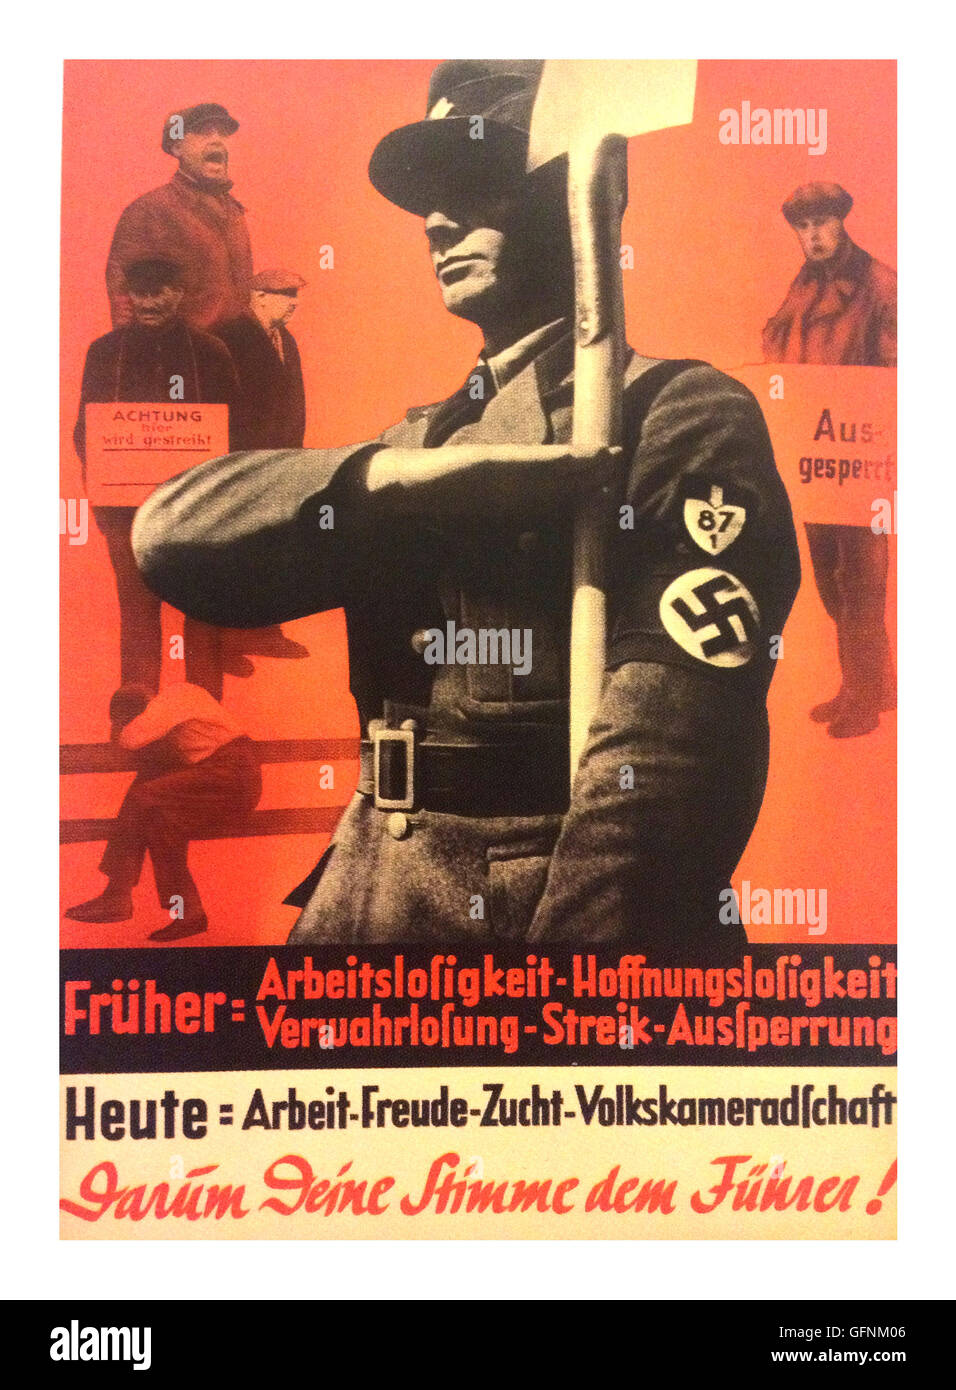 1937 NSDAP ADOLF HITLER propaganda poster, featuring a Nazi Party member in uniform wearing a swastika armband, saluting as he is holding up a shovel, with unemployed or striking workers in the background. 'On March 29, vote for Adolf Hitler, who will end unemployment and civil strife in Germany' Stock Photo